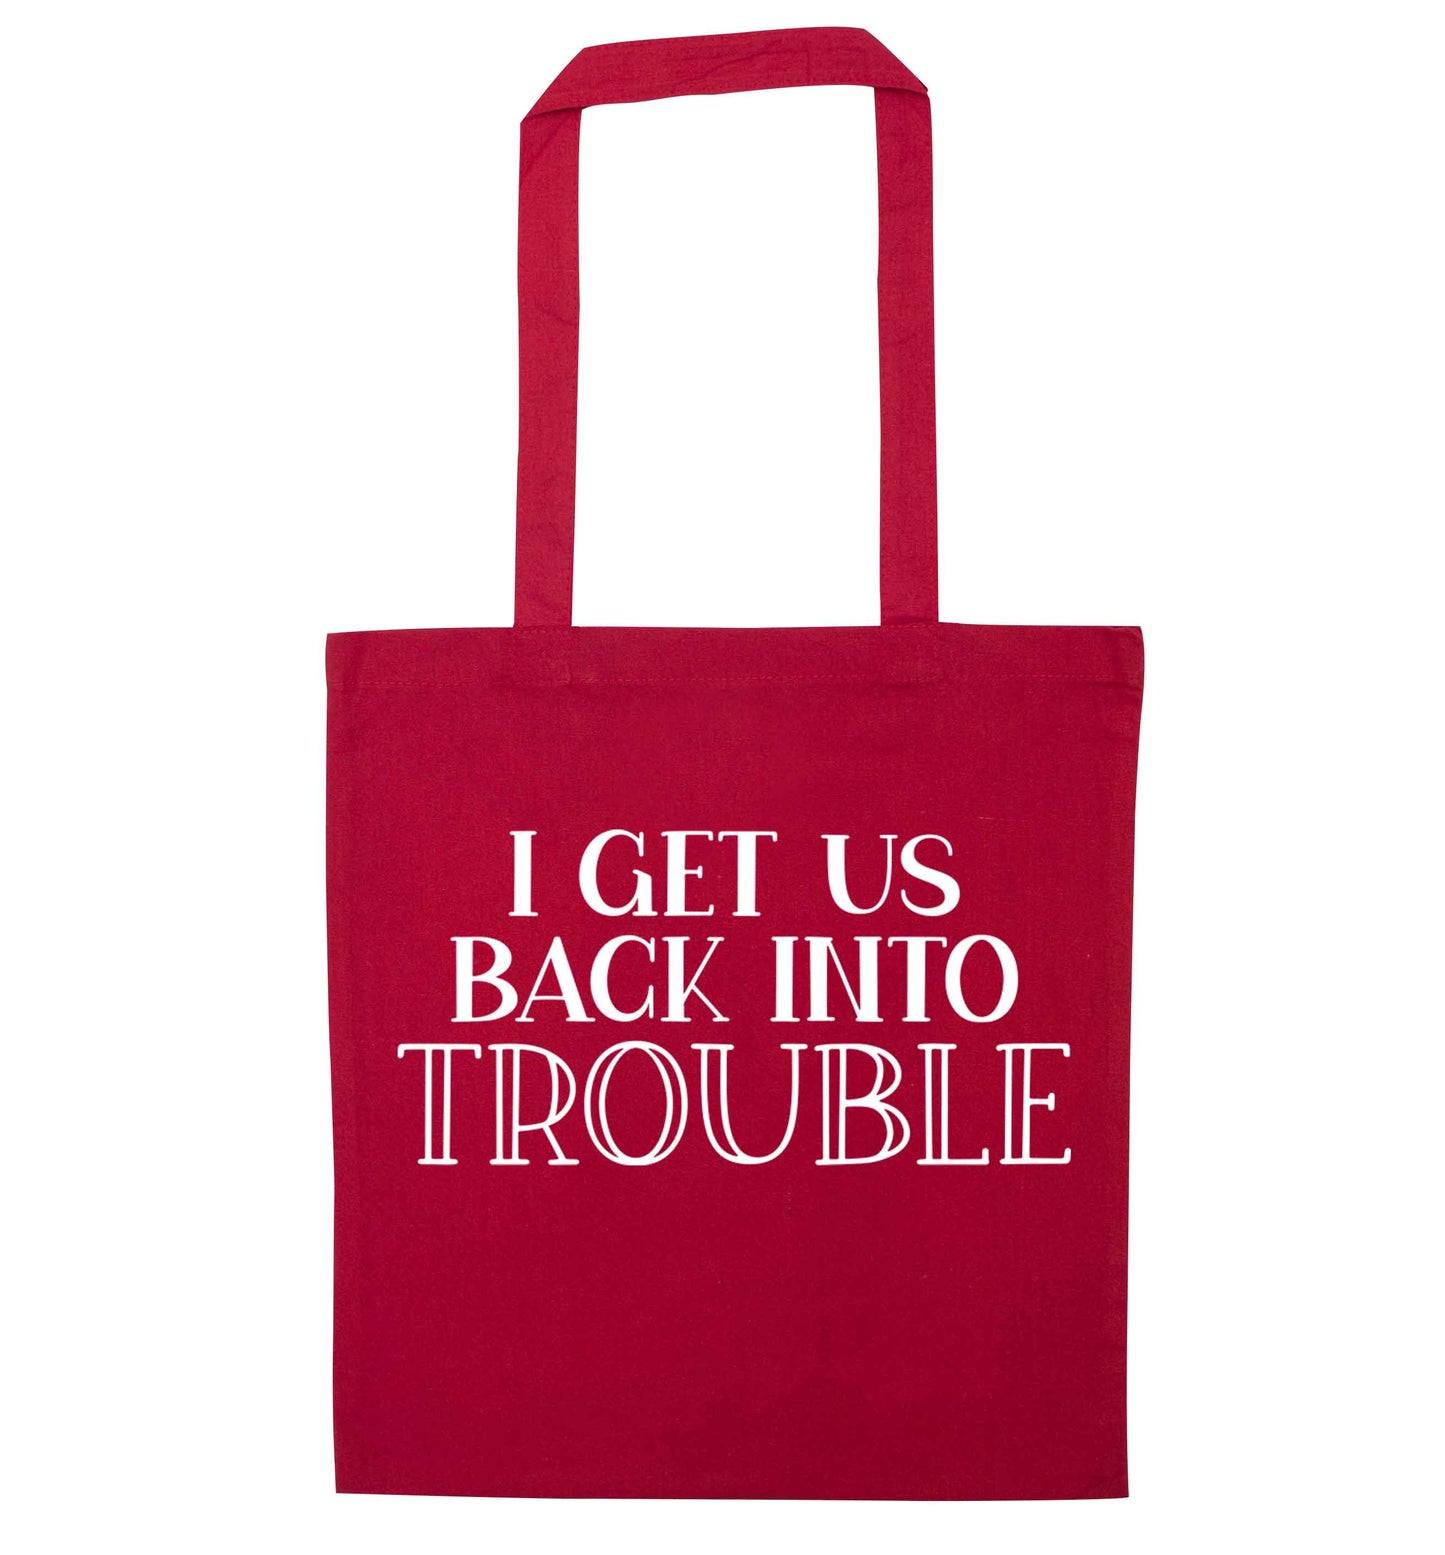 I get us back into trouble red tote bag